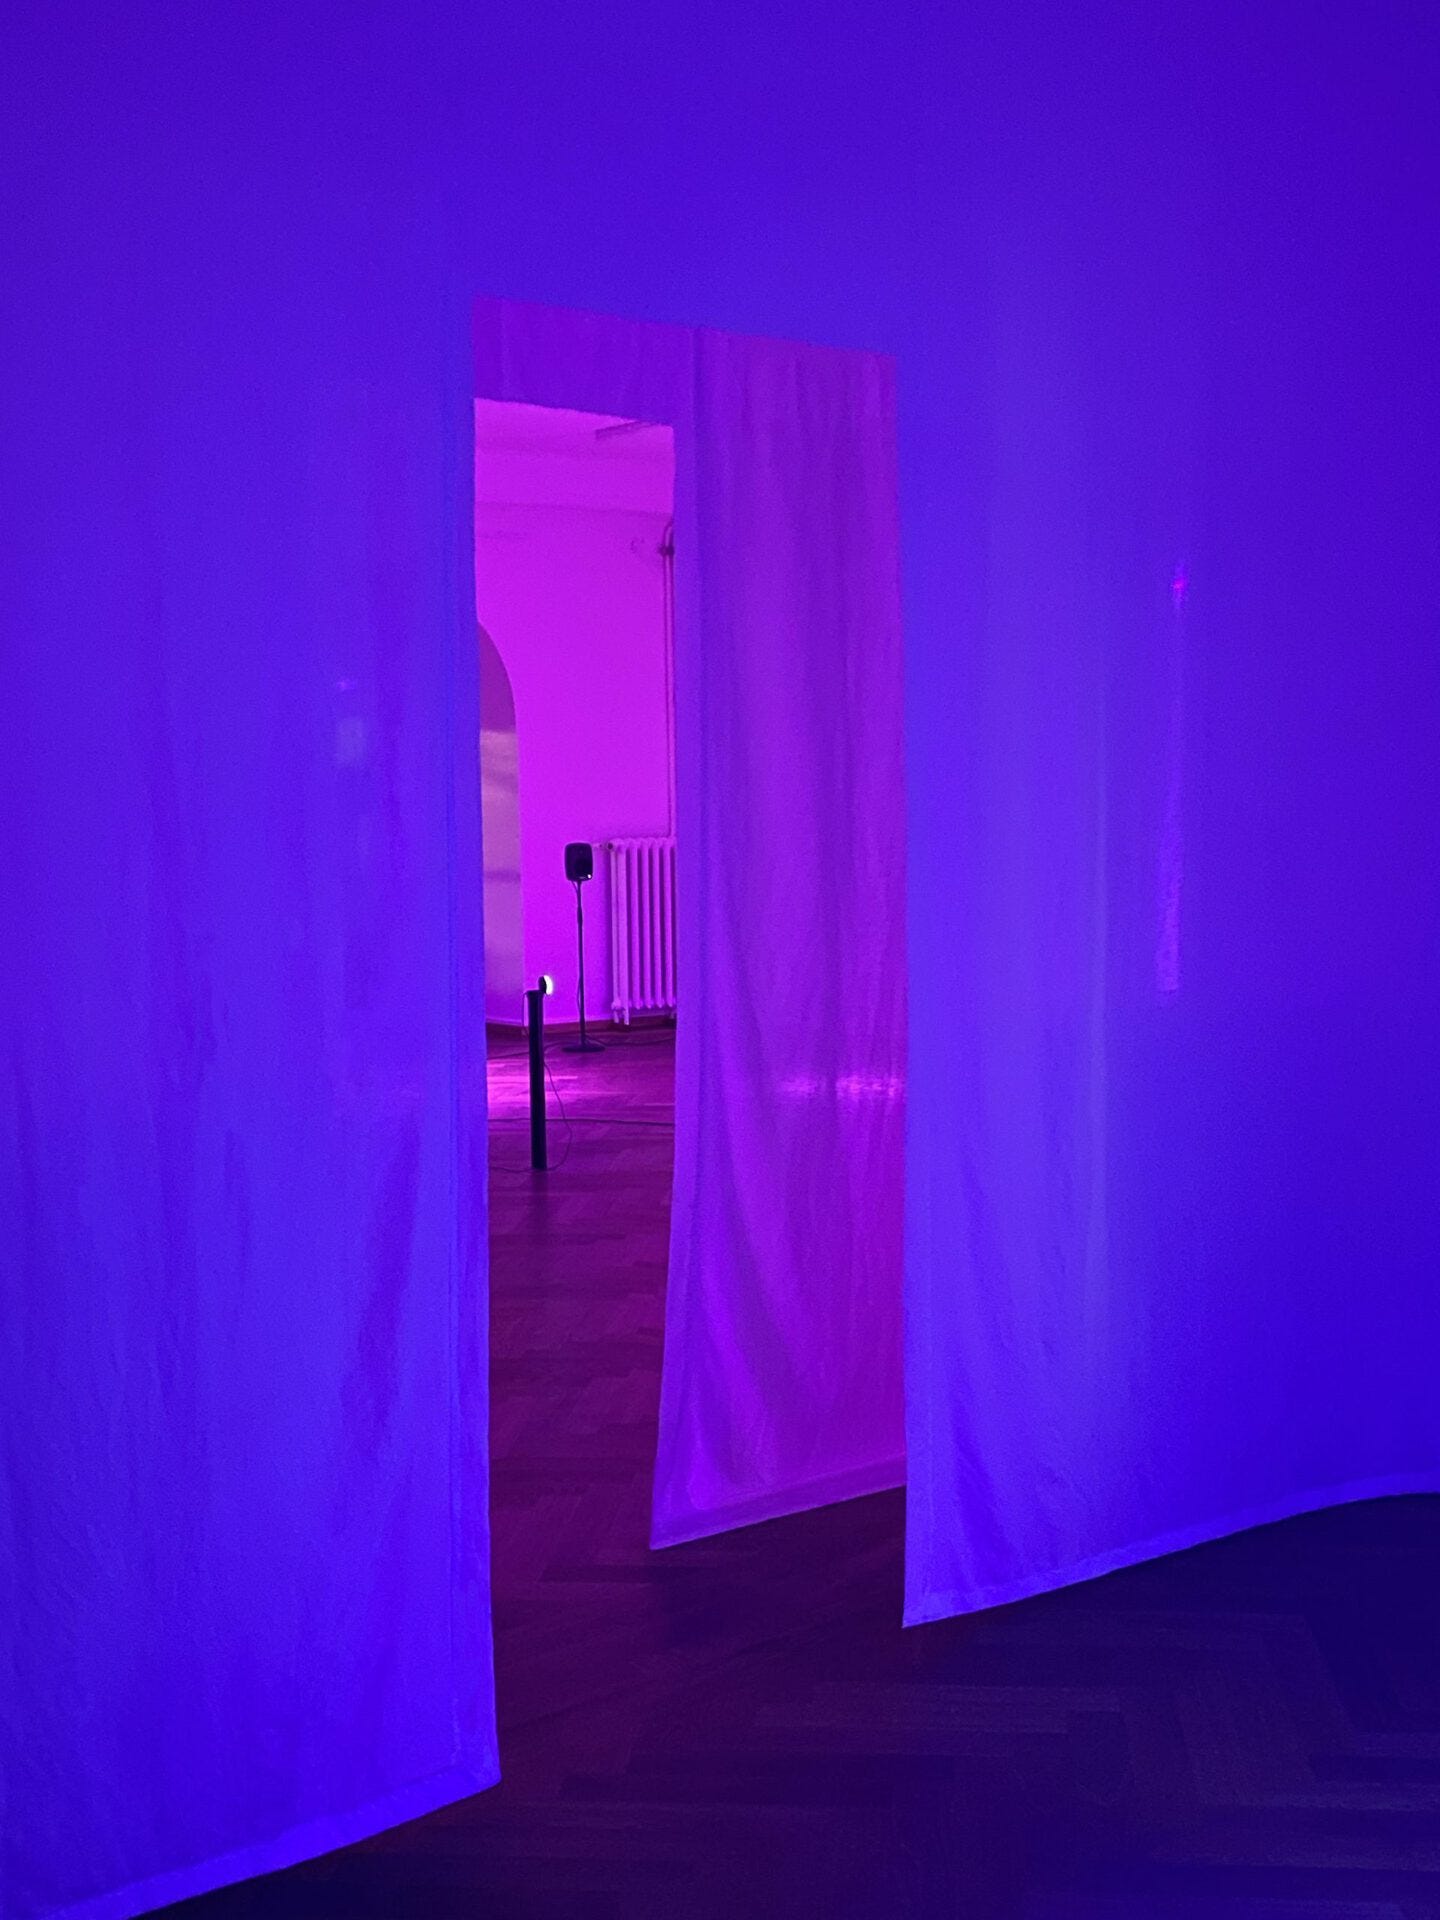 Sandar Tun Tun, SYNTHIA, light and interactive sound installation, 2021. “Casting Shades at New Moon", installation view, 2021, KRONE COURONNE. Photo: © James Bantone.